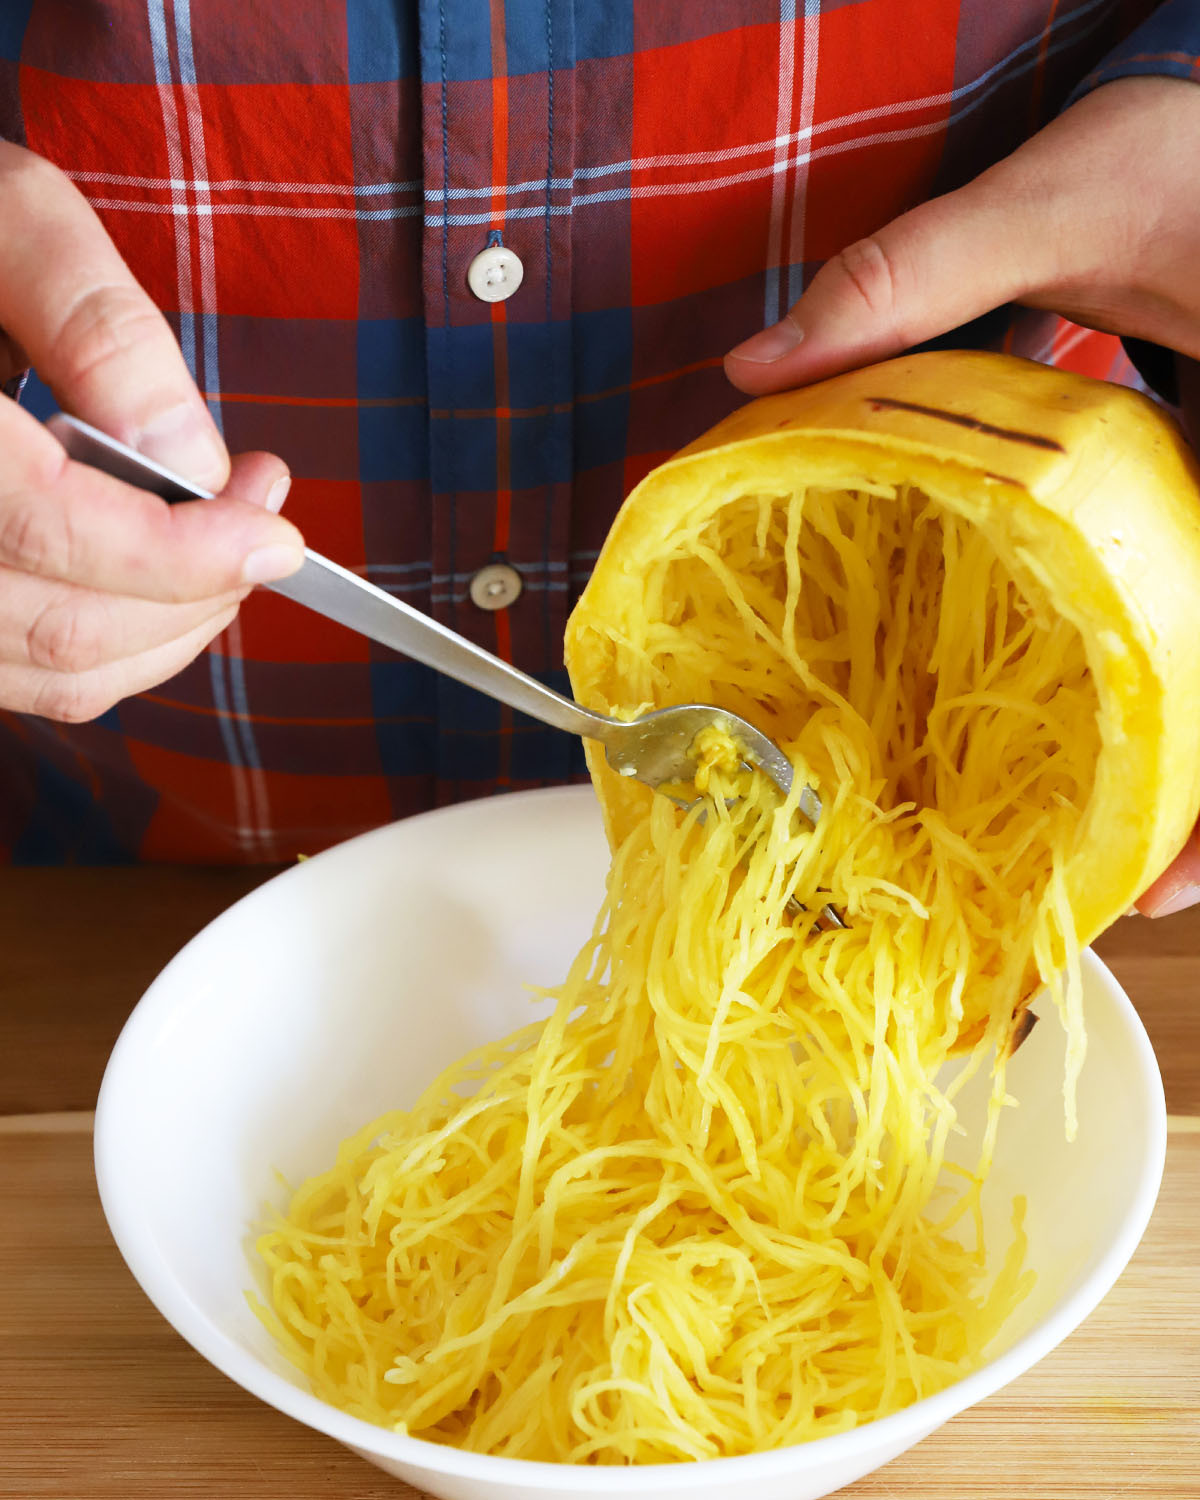 Spaghetti Squash Microwave Whole
 The Best Way to Cook and Cut Spaghetti Squash Whole Baked